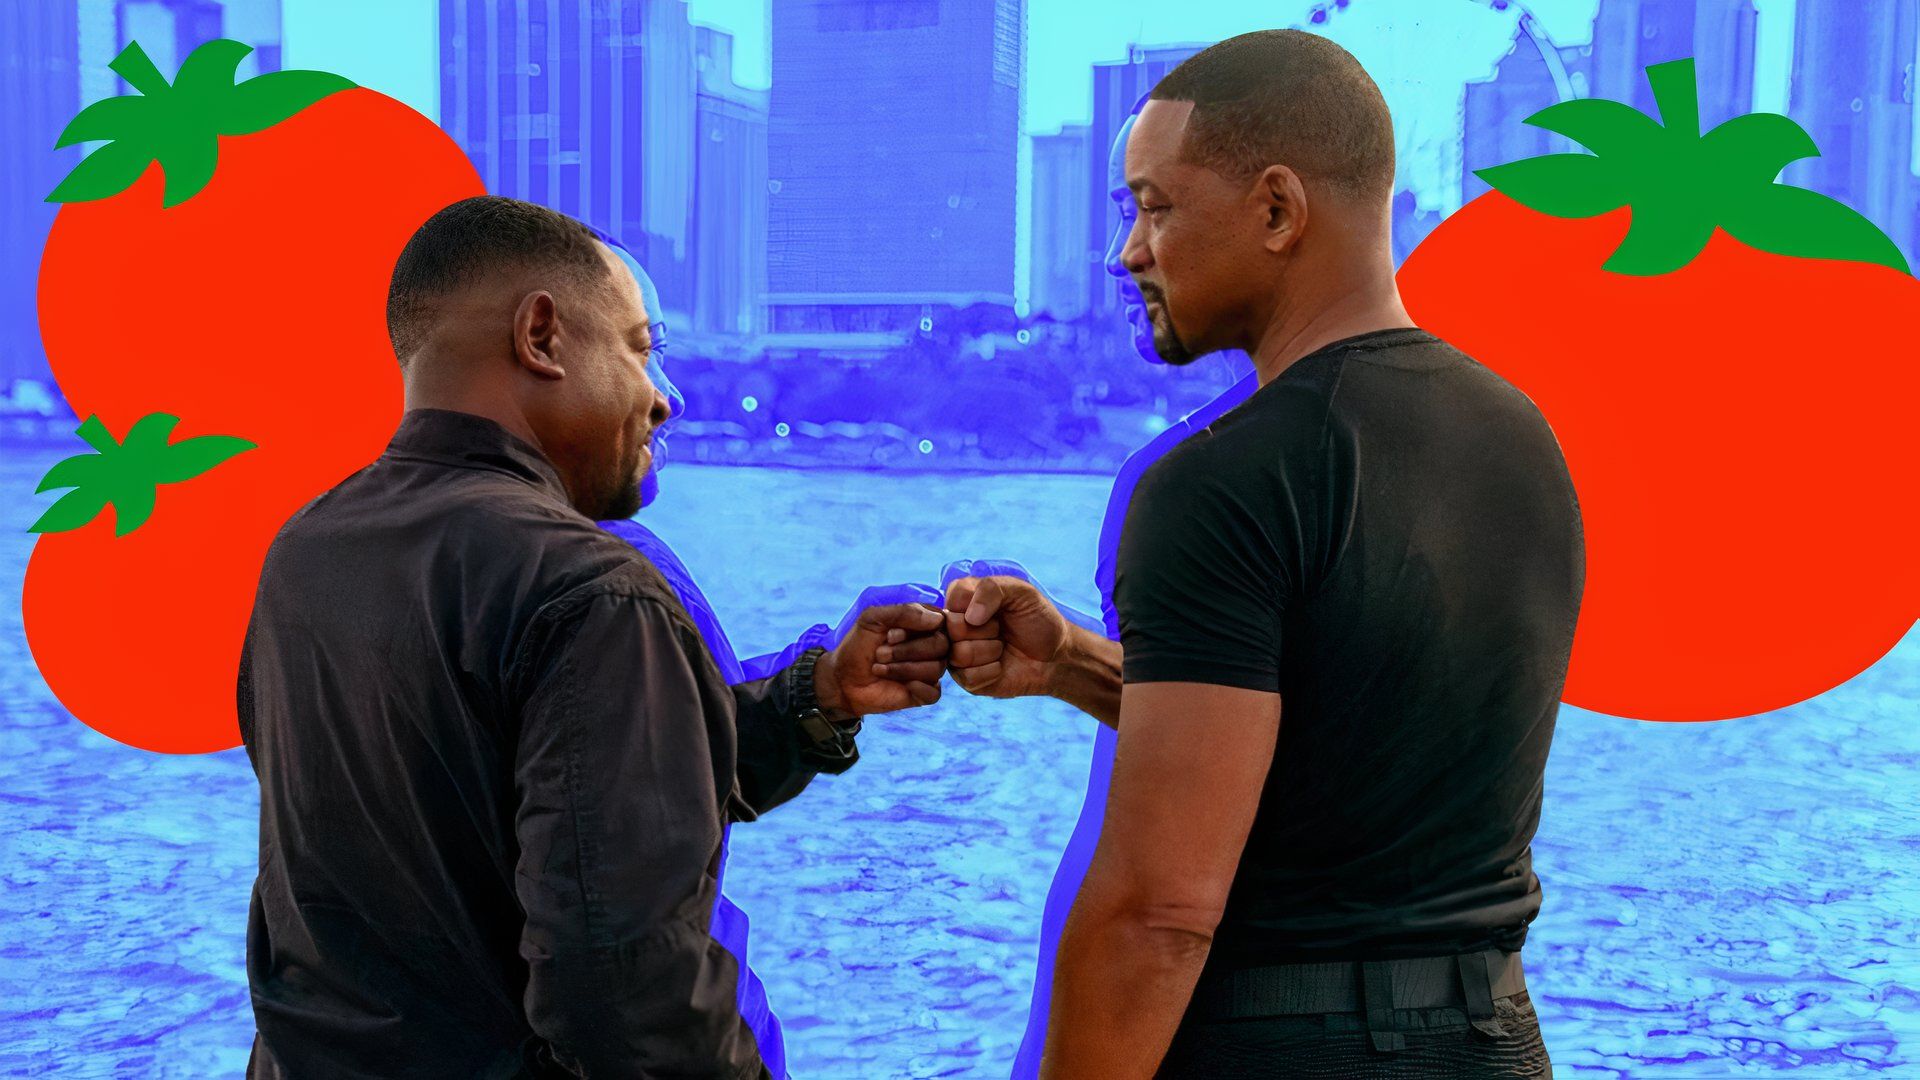 Will Smith and Martin Lawrence fist bumping surrounded by tomatoes.